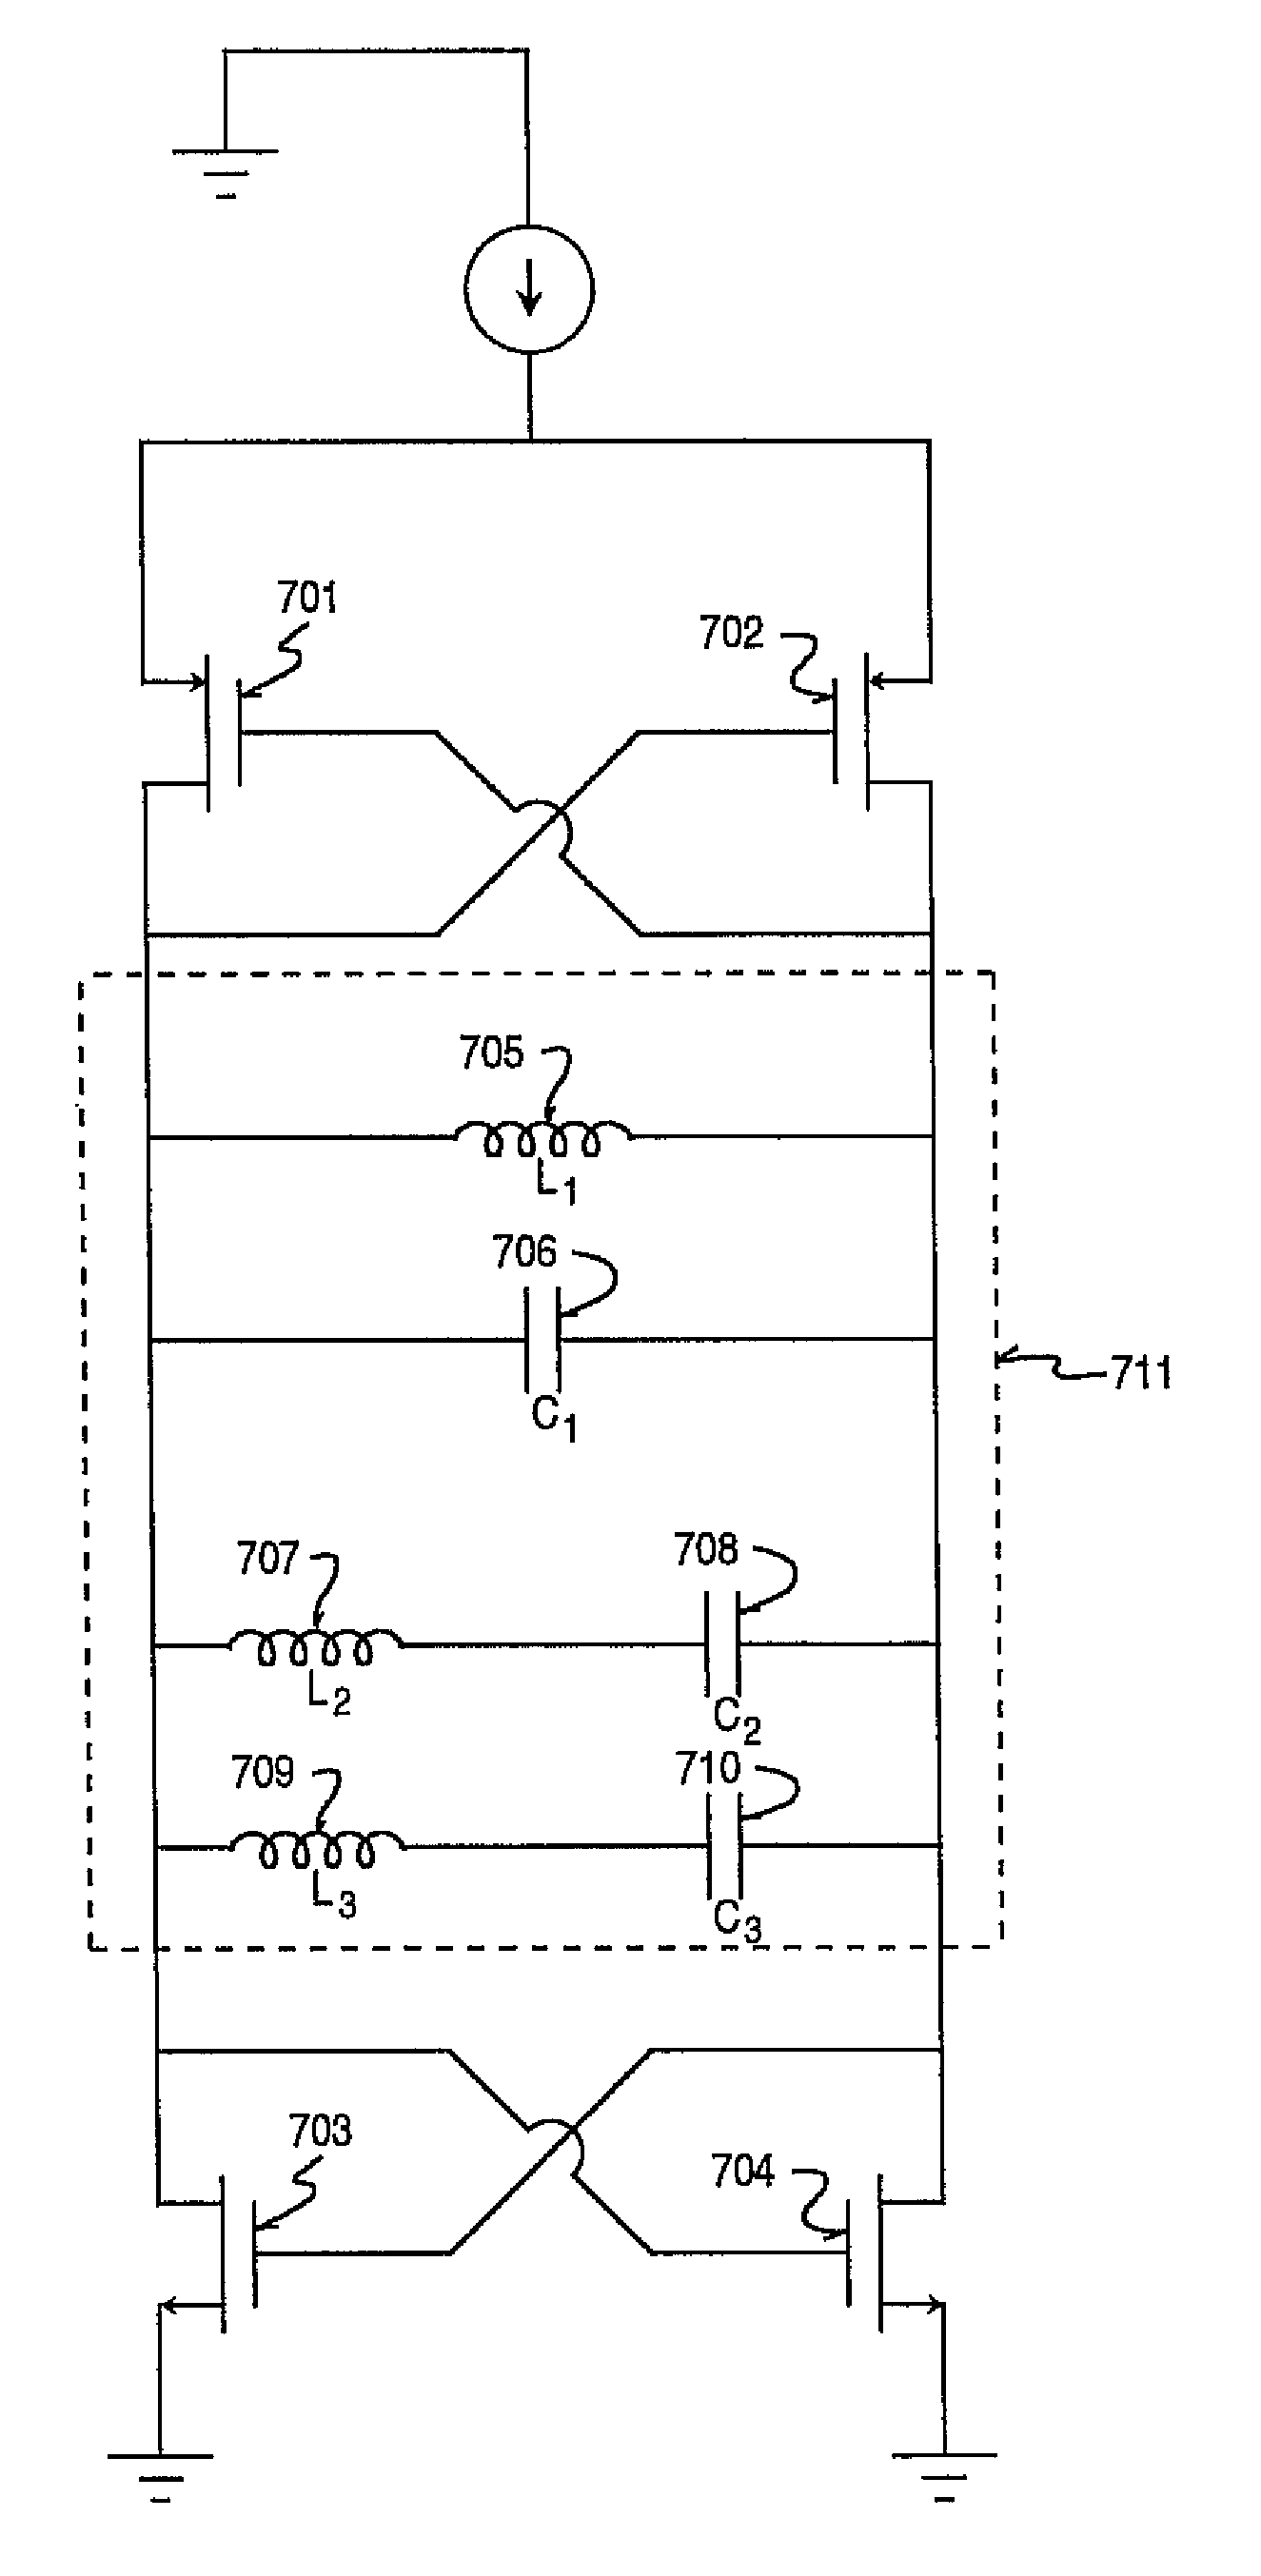 Voltage controlled oscillator having reduced phase noise